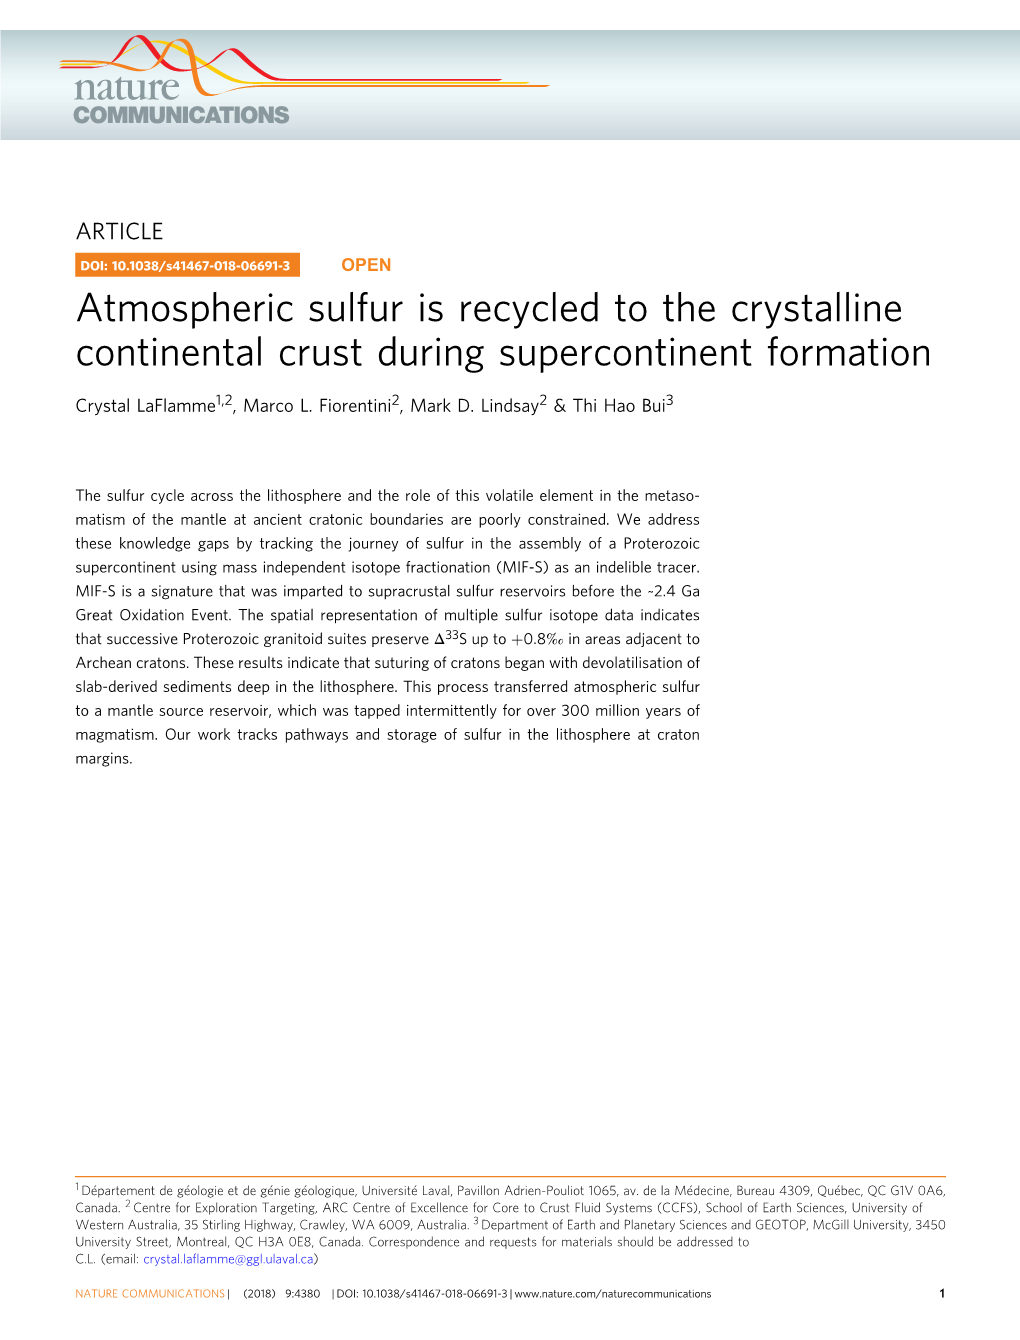 Atmospheric Sulfur Is Recycled to the Crystalline Continental Crust During Supercontinent Formation